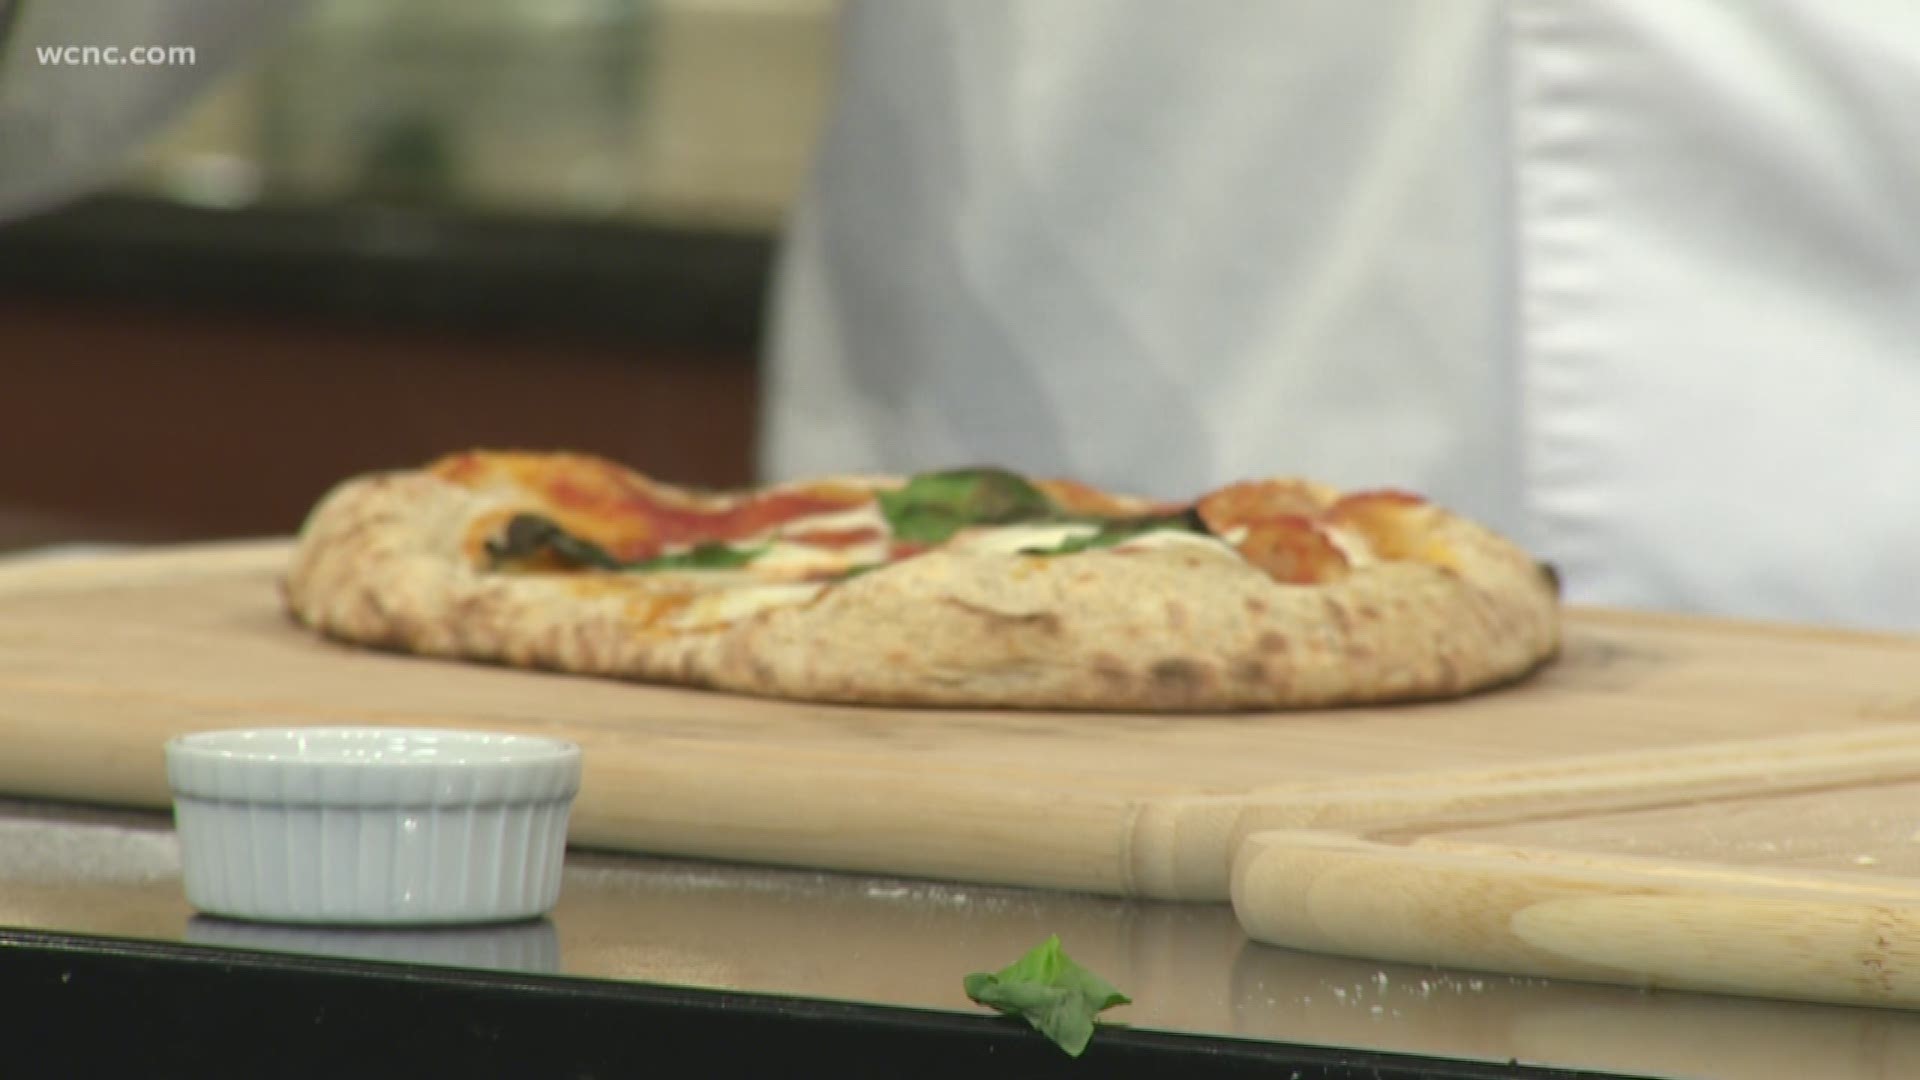 October is National Pizza Month! Chef Ross Purple shows us how to make guilt free pizza that’s low-carb and gluten free.